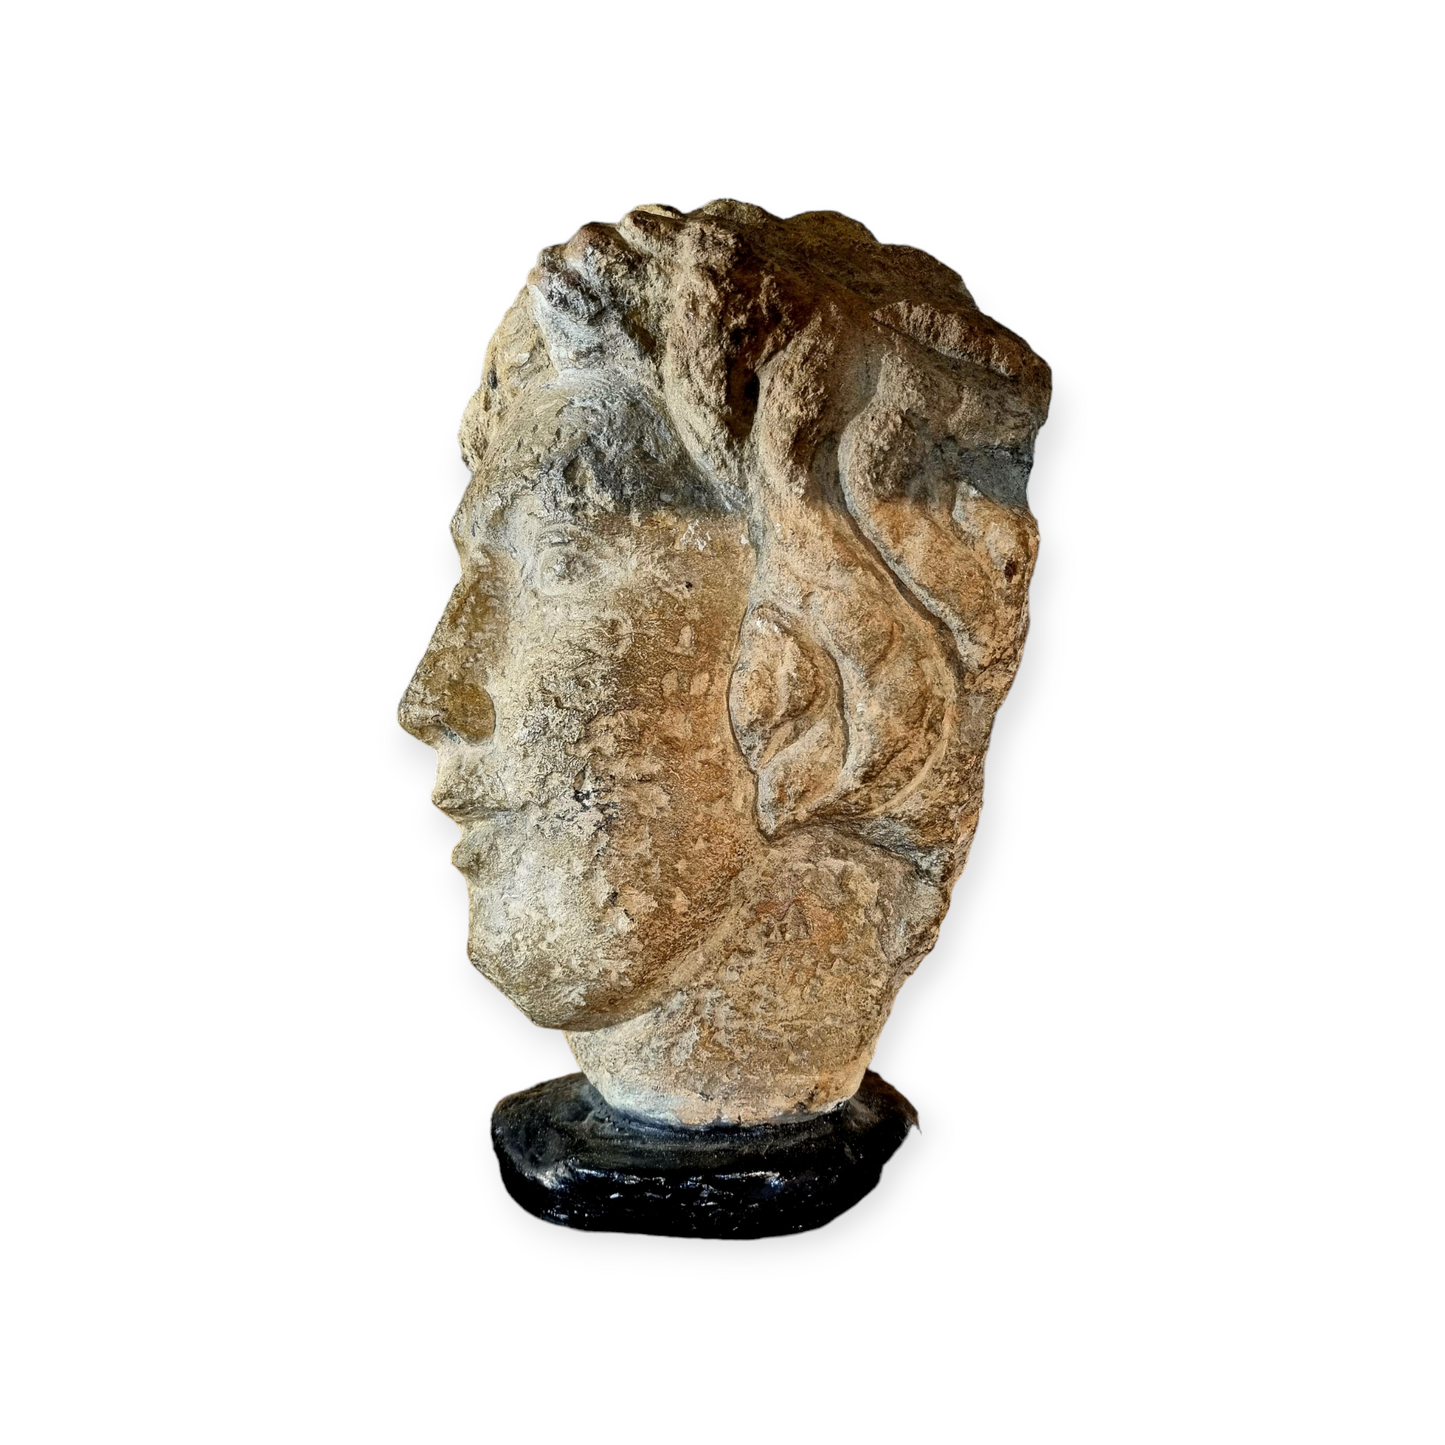 Roman Antiquity - 2nd Century AD - A Life-Size Roman Antique Carved Stone Head of a Male